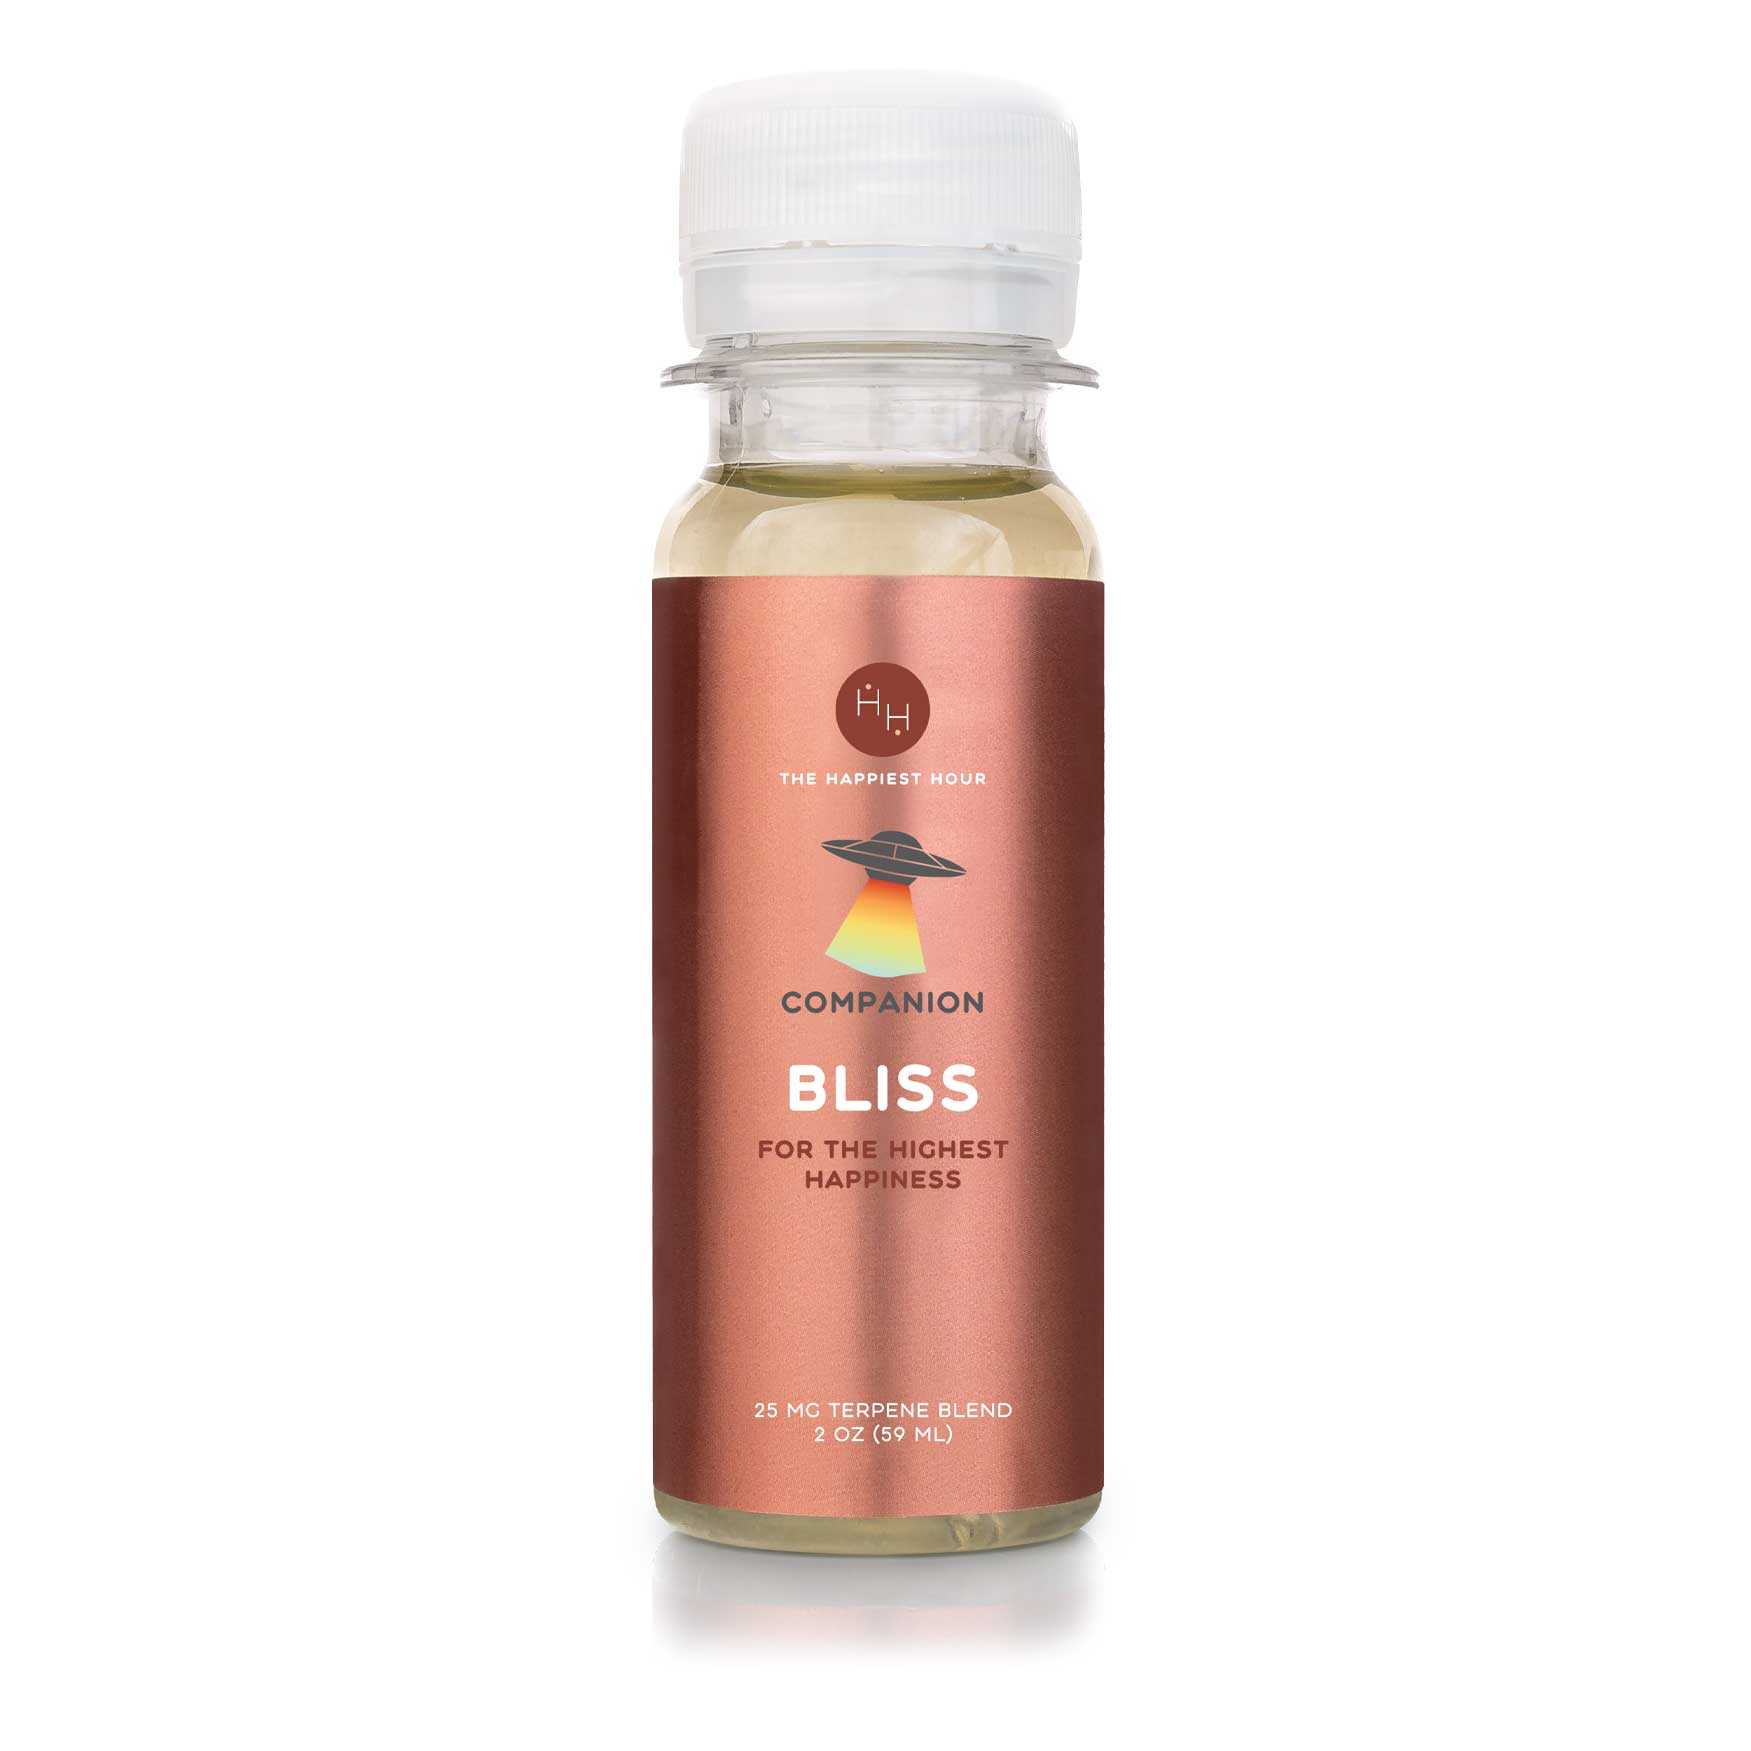 a bottle of a lemon and lavender infused terpene drink called "bliss" from the happiest hour